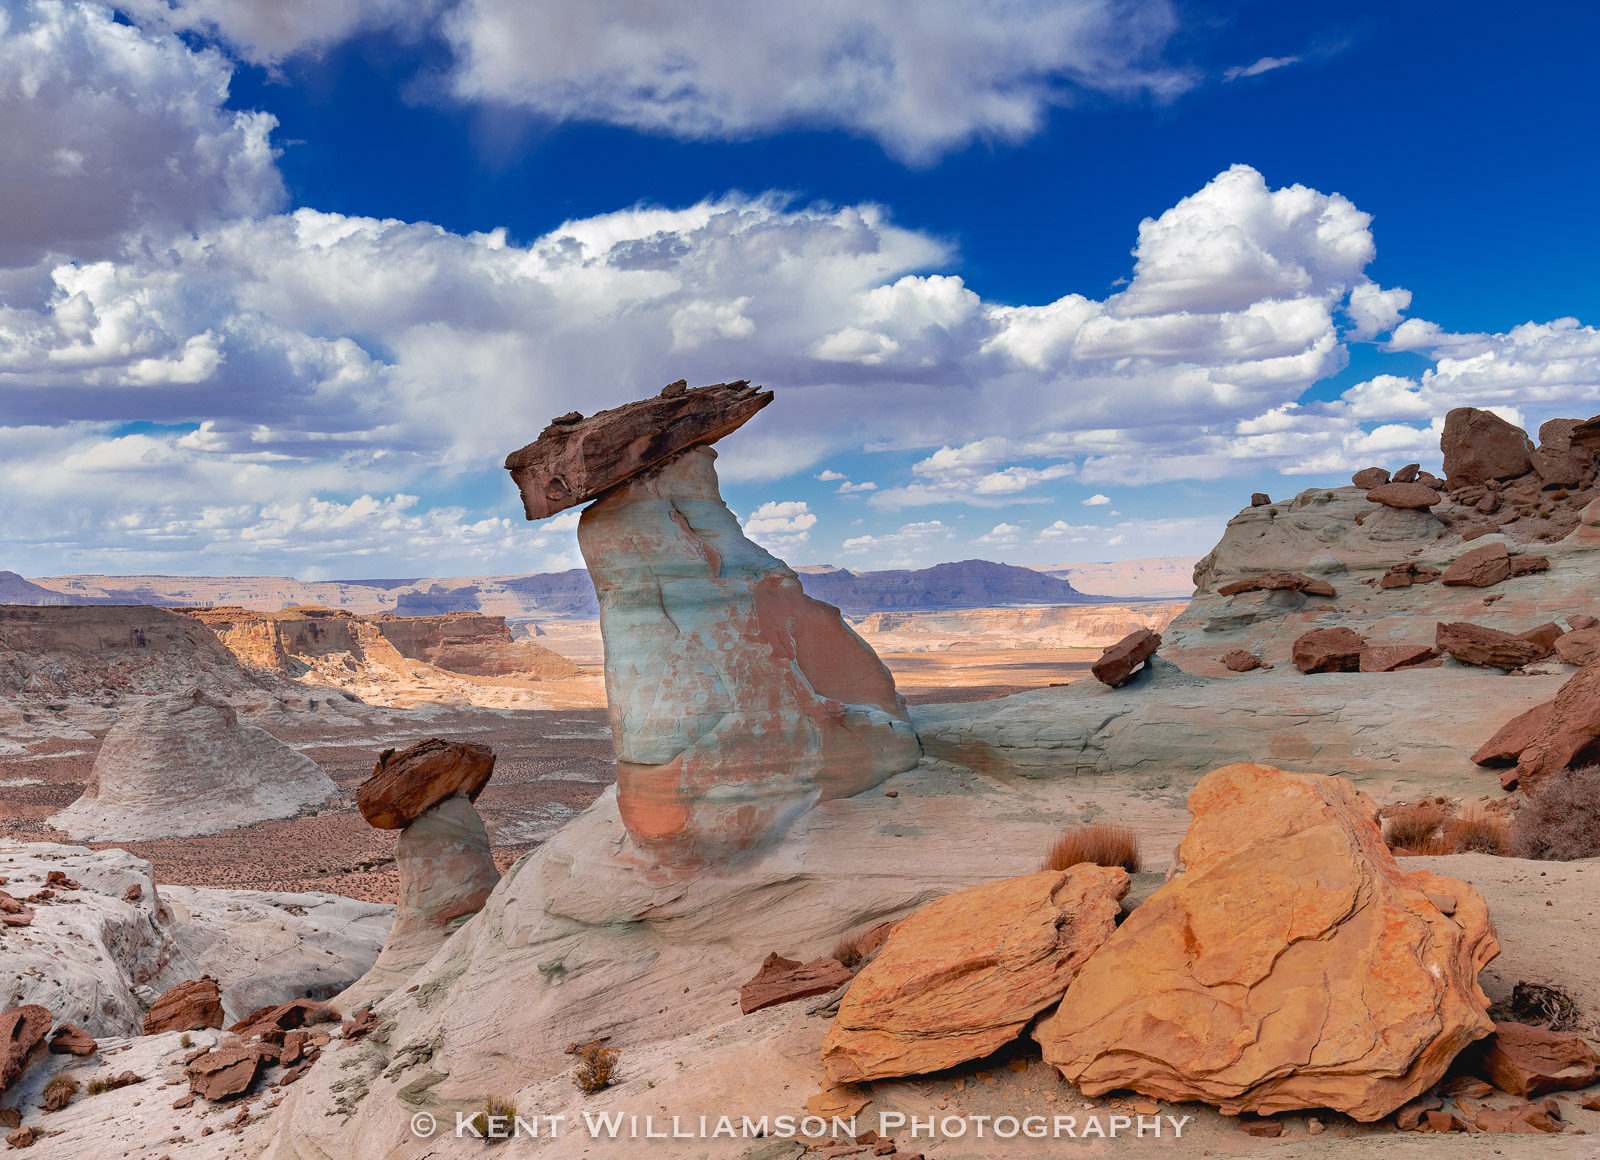 Clouds roll in over Stud Horse Point at Glen Canyon National Recreation Area